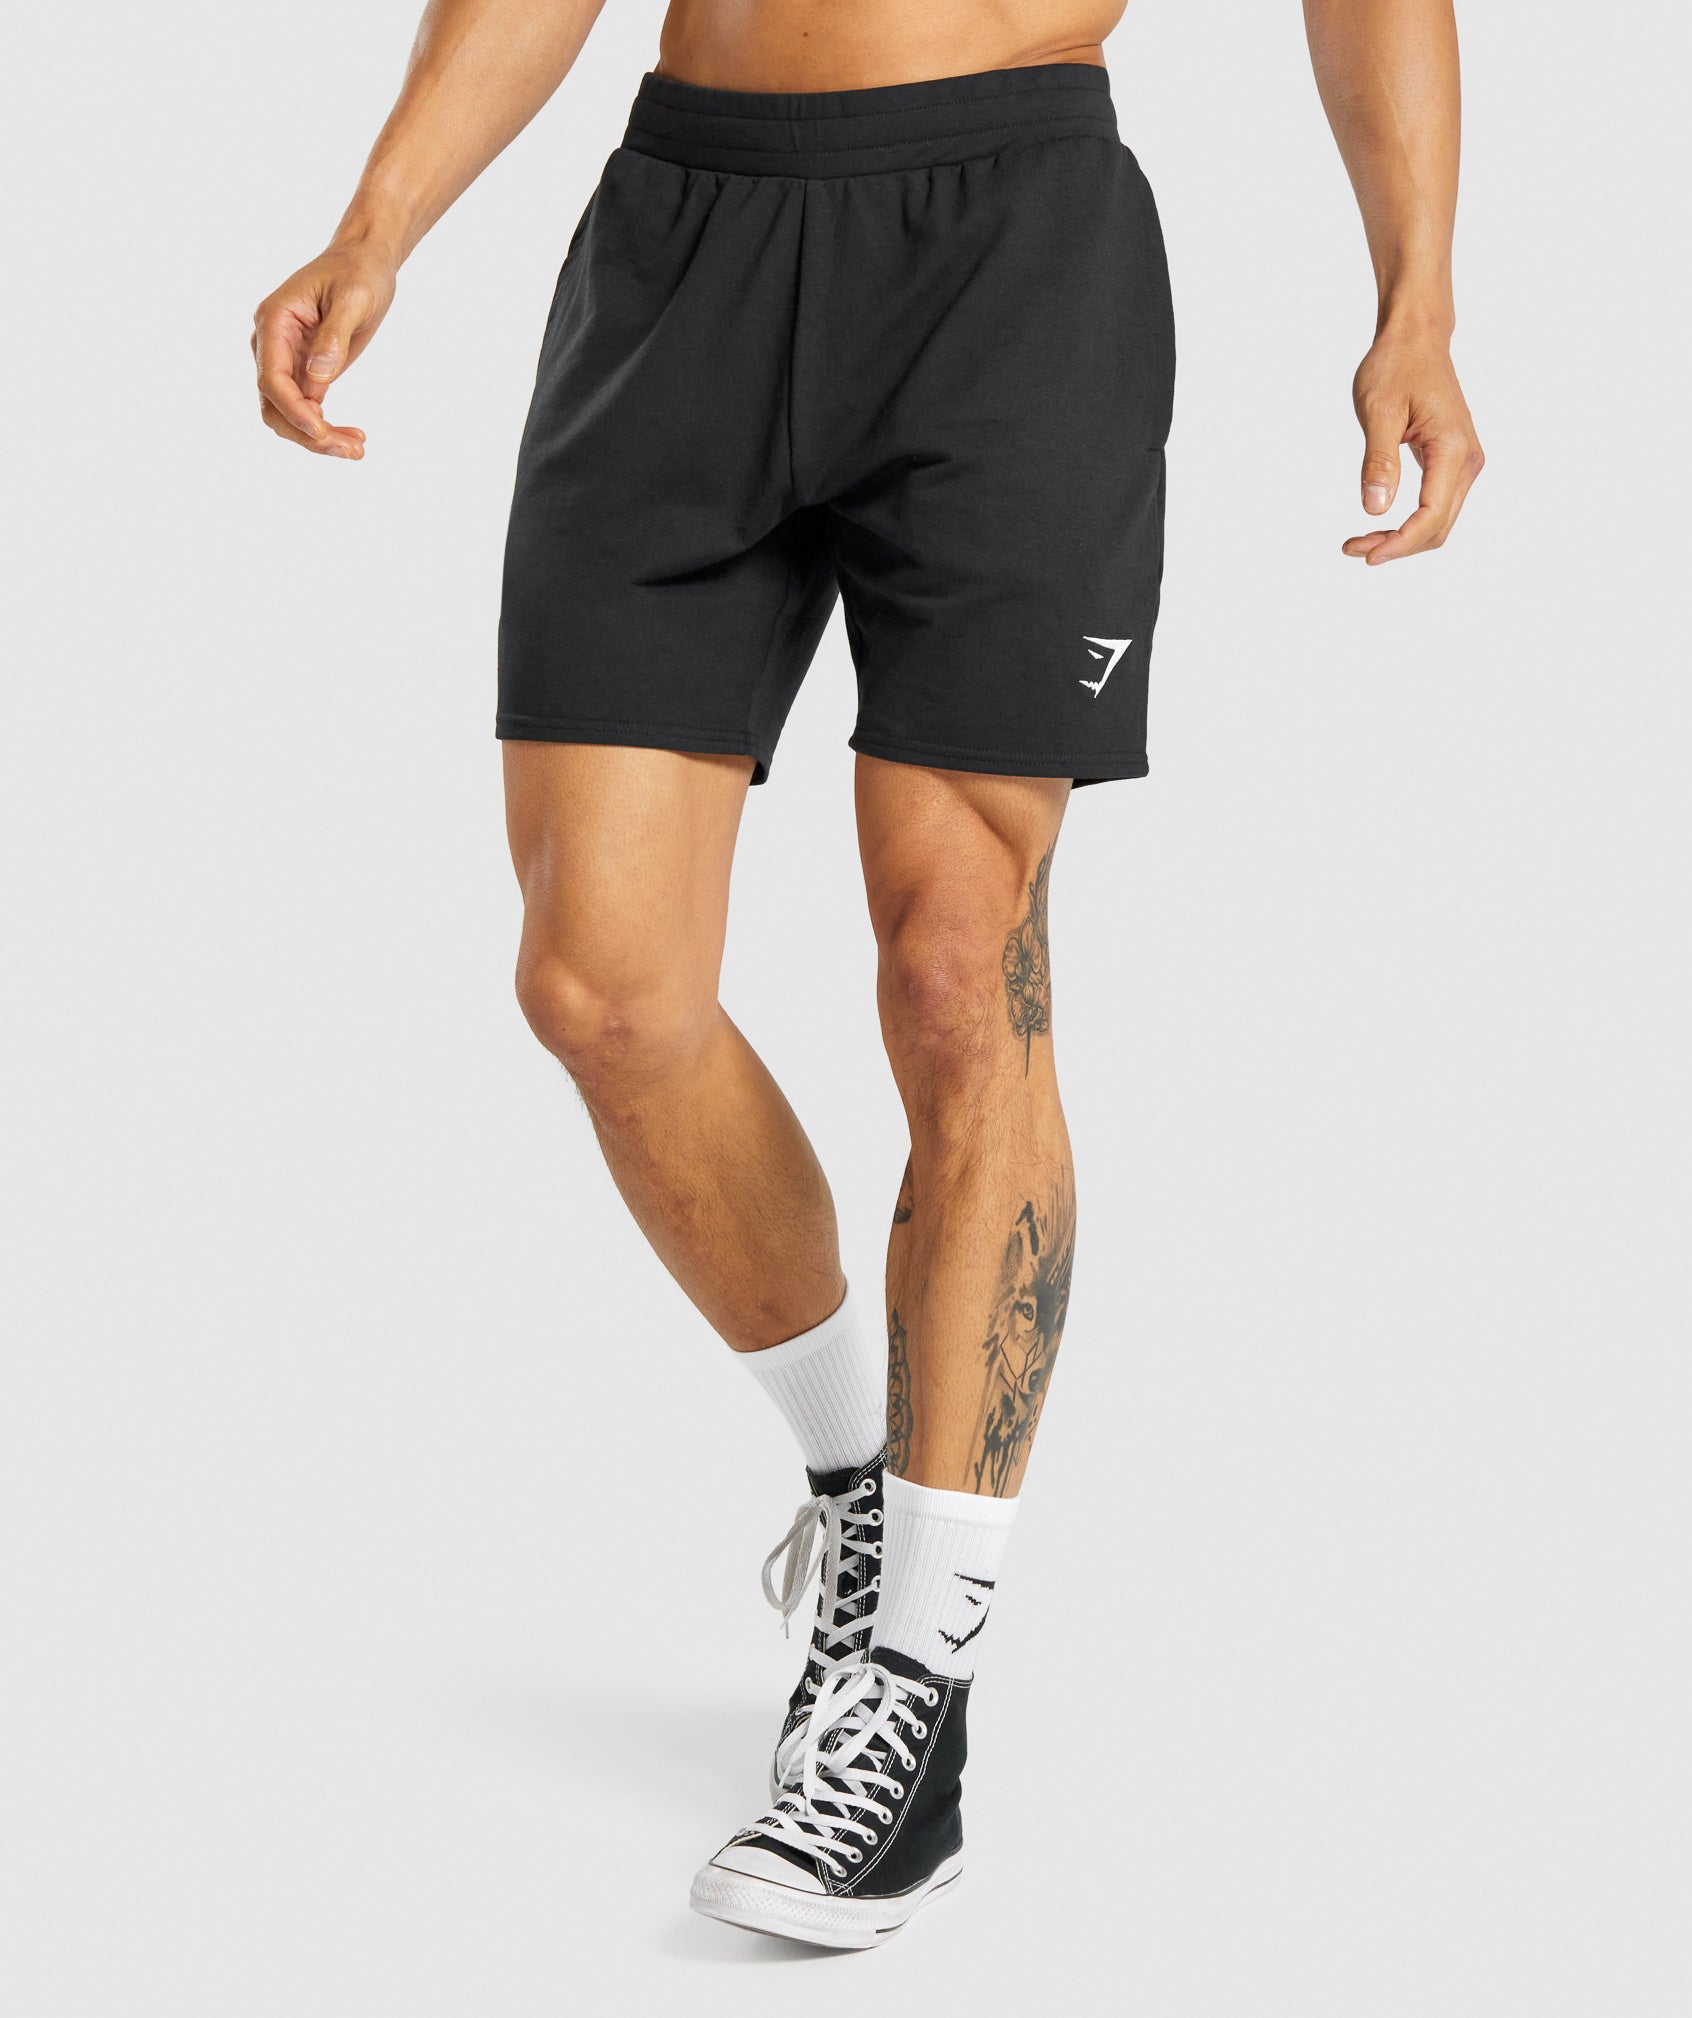 Essential 7" Shorts in Black - view 1